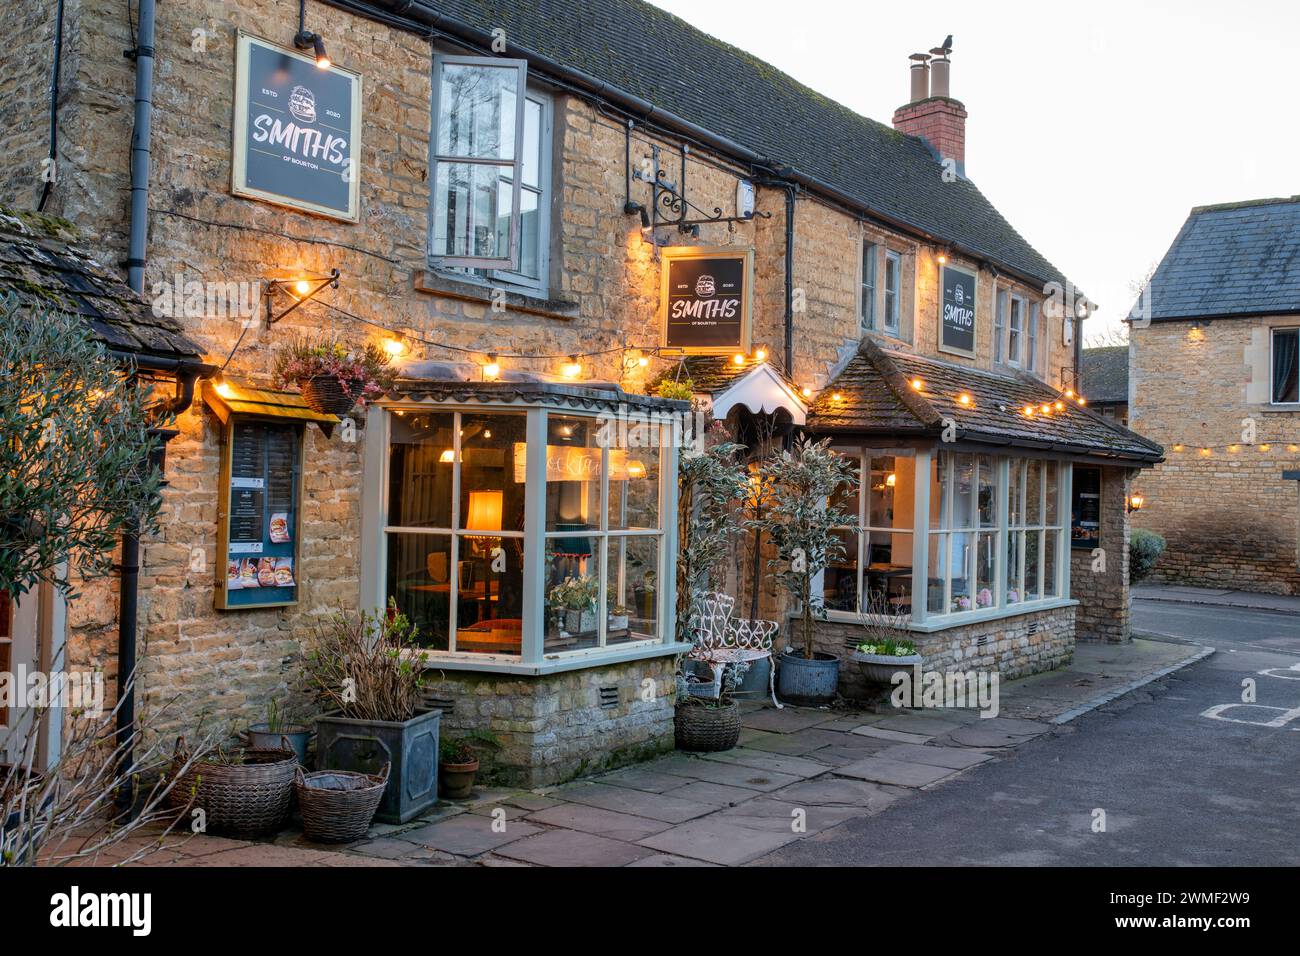 Ristorante Smiths of Bourton. Bourton on the Water, Cotswolds, Gloucestershire, Inghilterra Foto Stock